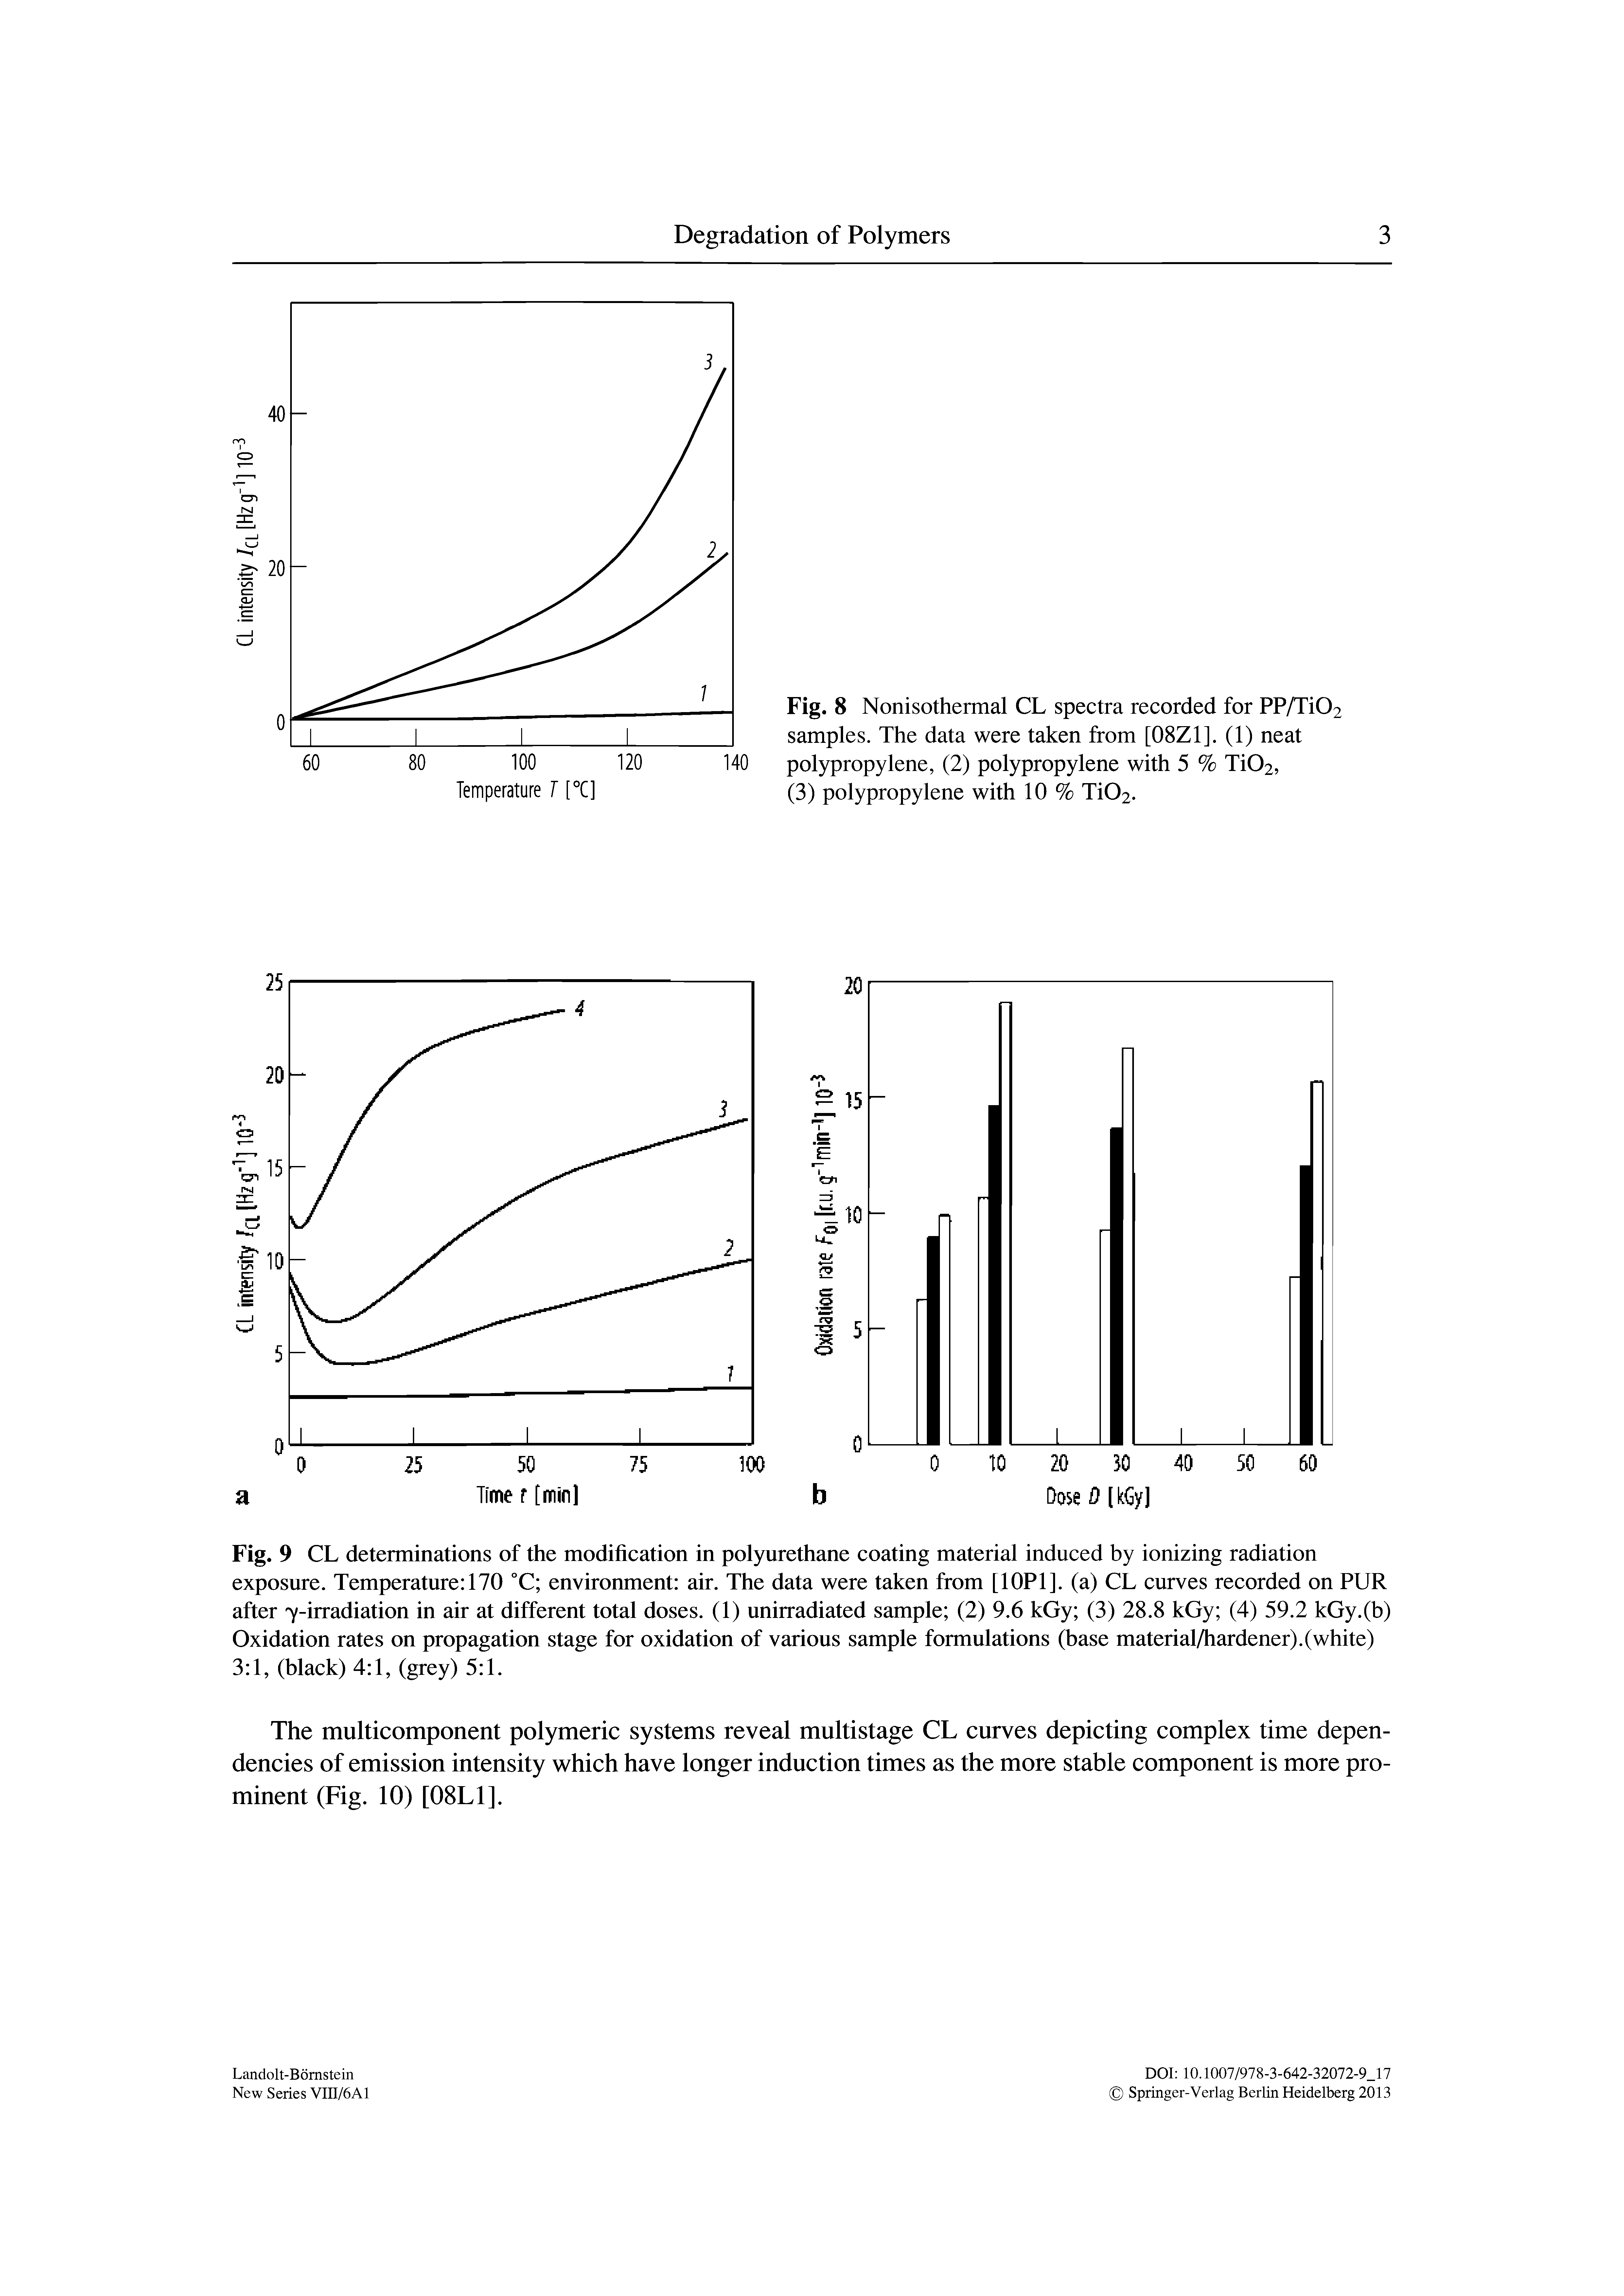 Fig. 9 CL determinations of the modification in pol)oirethane coating material induced by ionizing radiation exposure. Temperature 170 °C environment air. The data were taken from [lOPl]. (a) CL curves recorded on PUR after y-irradiation in air at different total doses. (1) unirradiated sample (2) 9.6 kGy (3) 28.8 kGy (4) 59.2 kGy.(b) Oxidation rates on propagation stage for oxidation of various sample formulations (base material/hardener).(white) 3 1, (black) 4 1, (grey) 5 1.